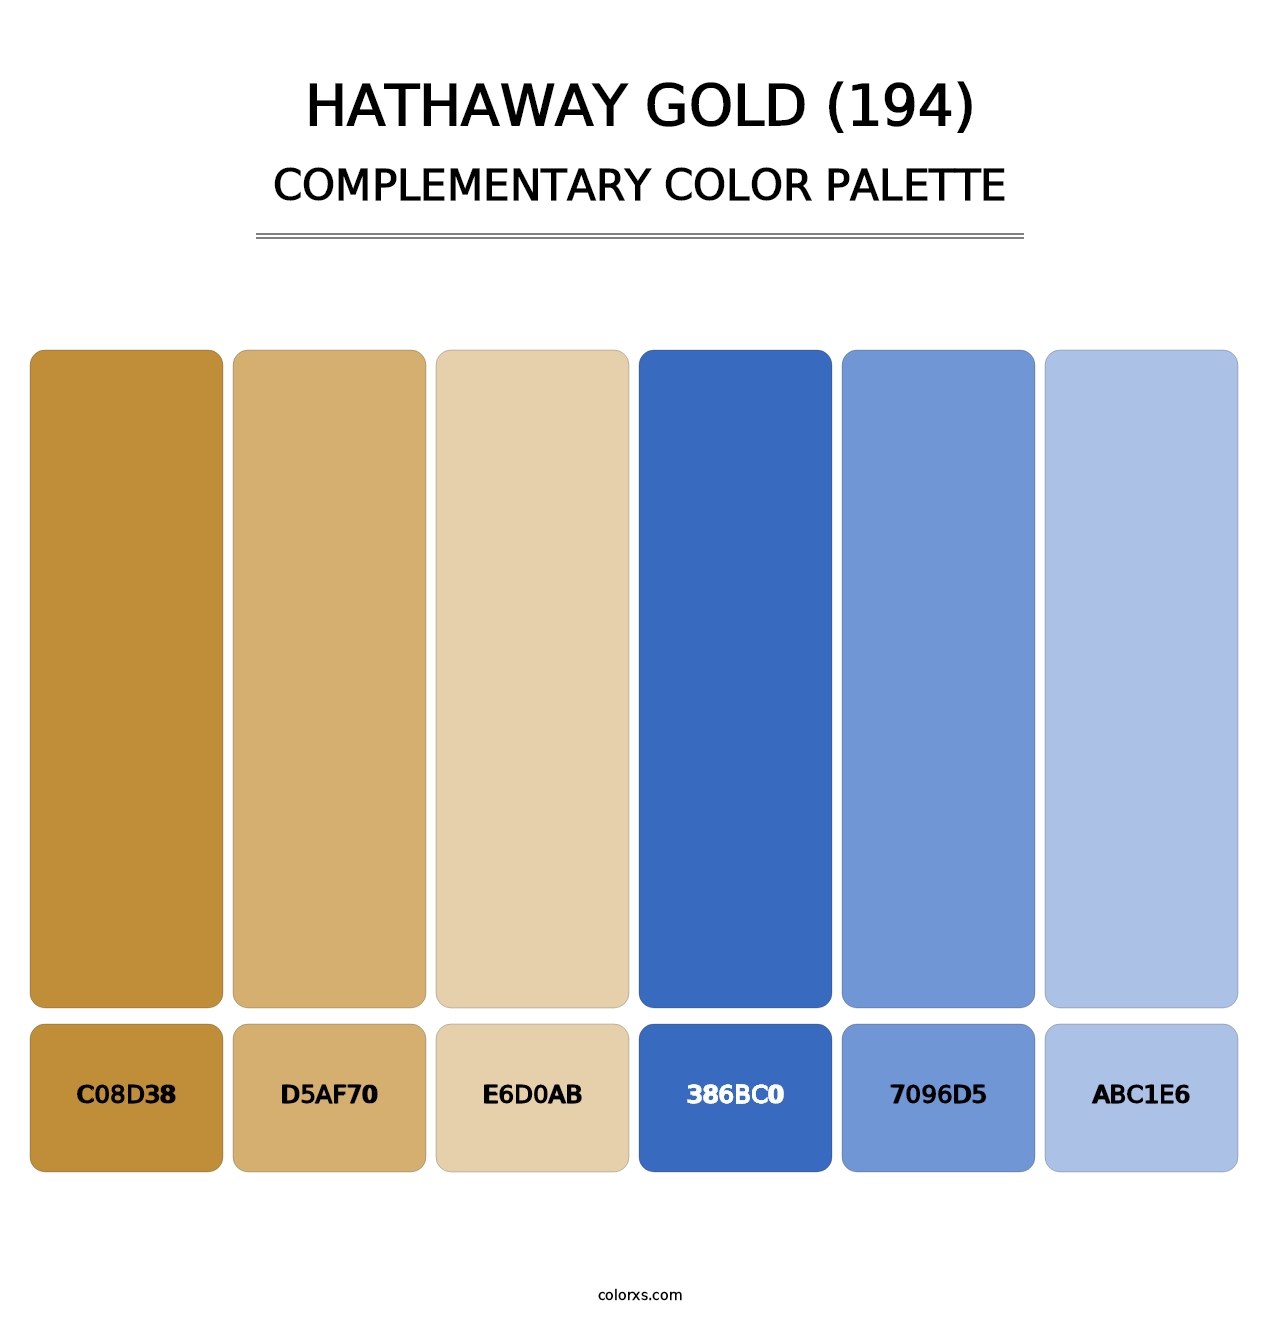 Hathaway Gold (194) - Complementary Color Palette